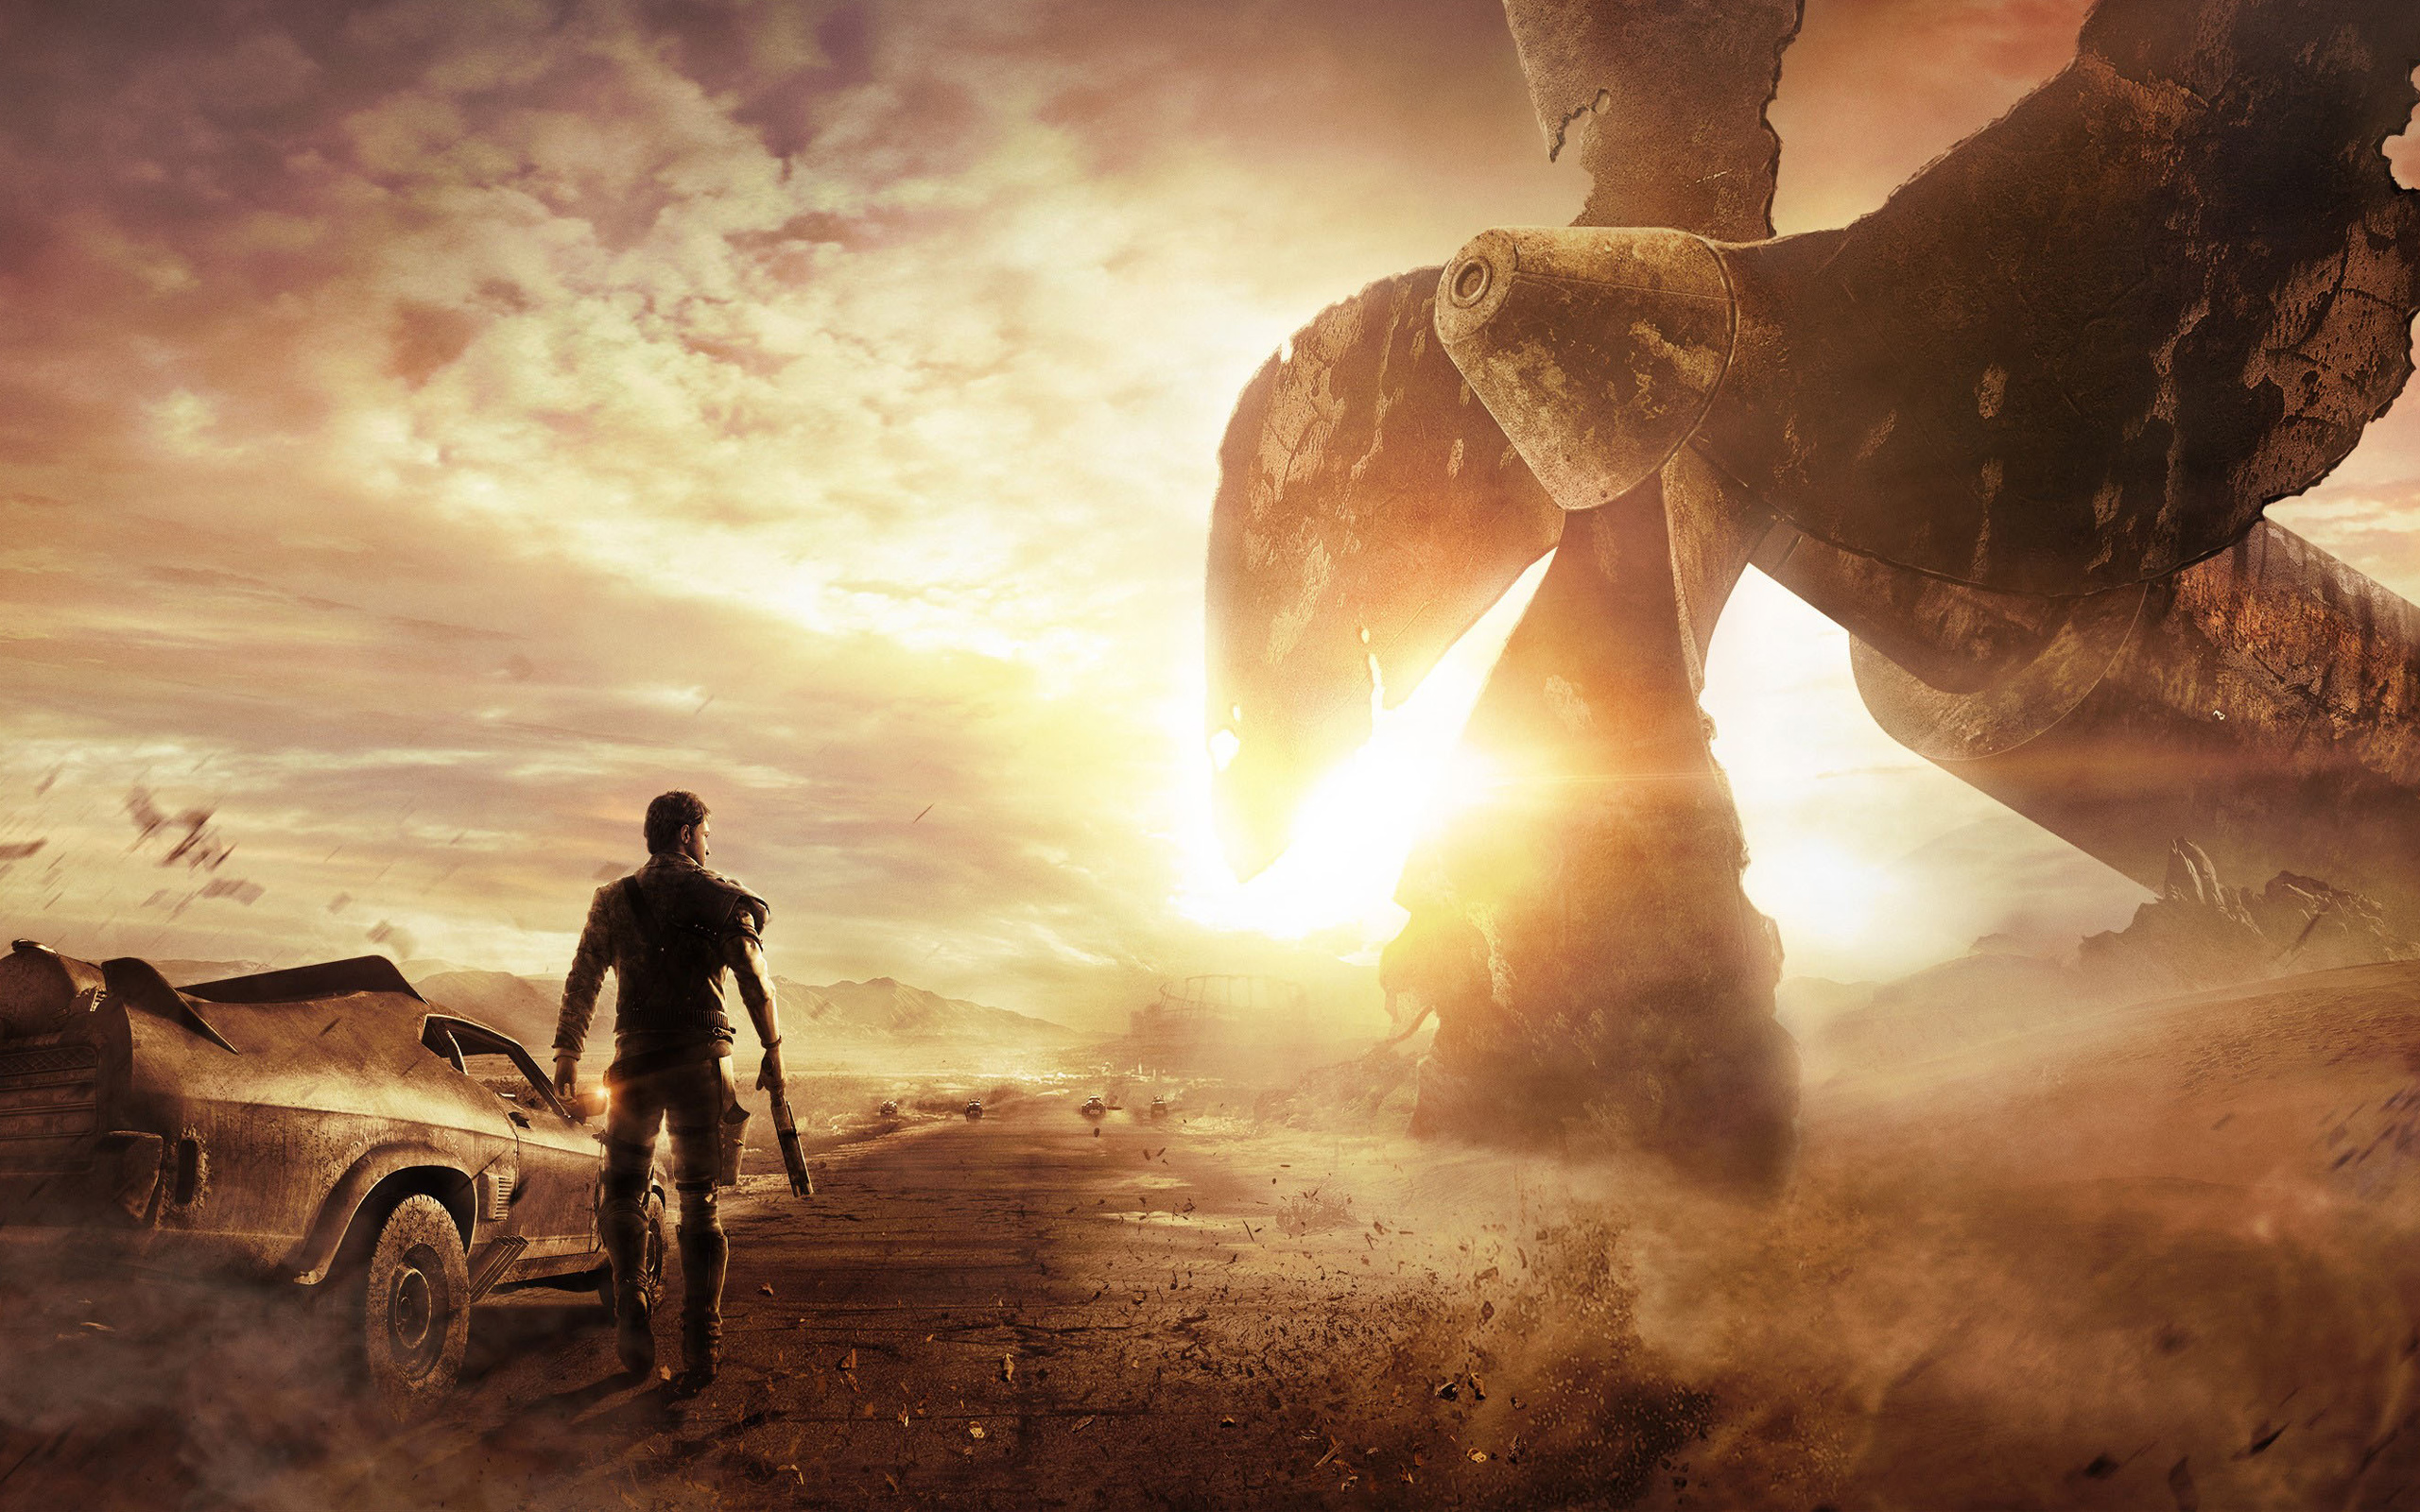 mad max wallpaper hd,sky,adventure game,human,vehicle,landscape